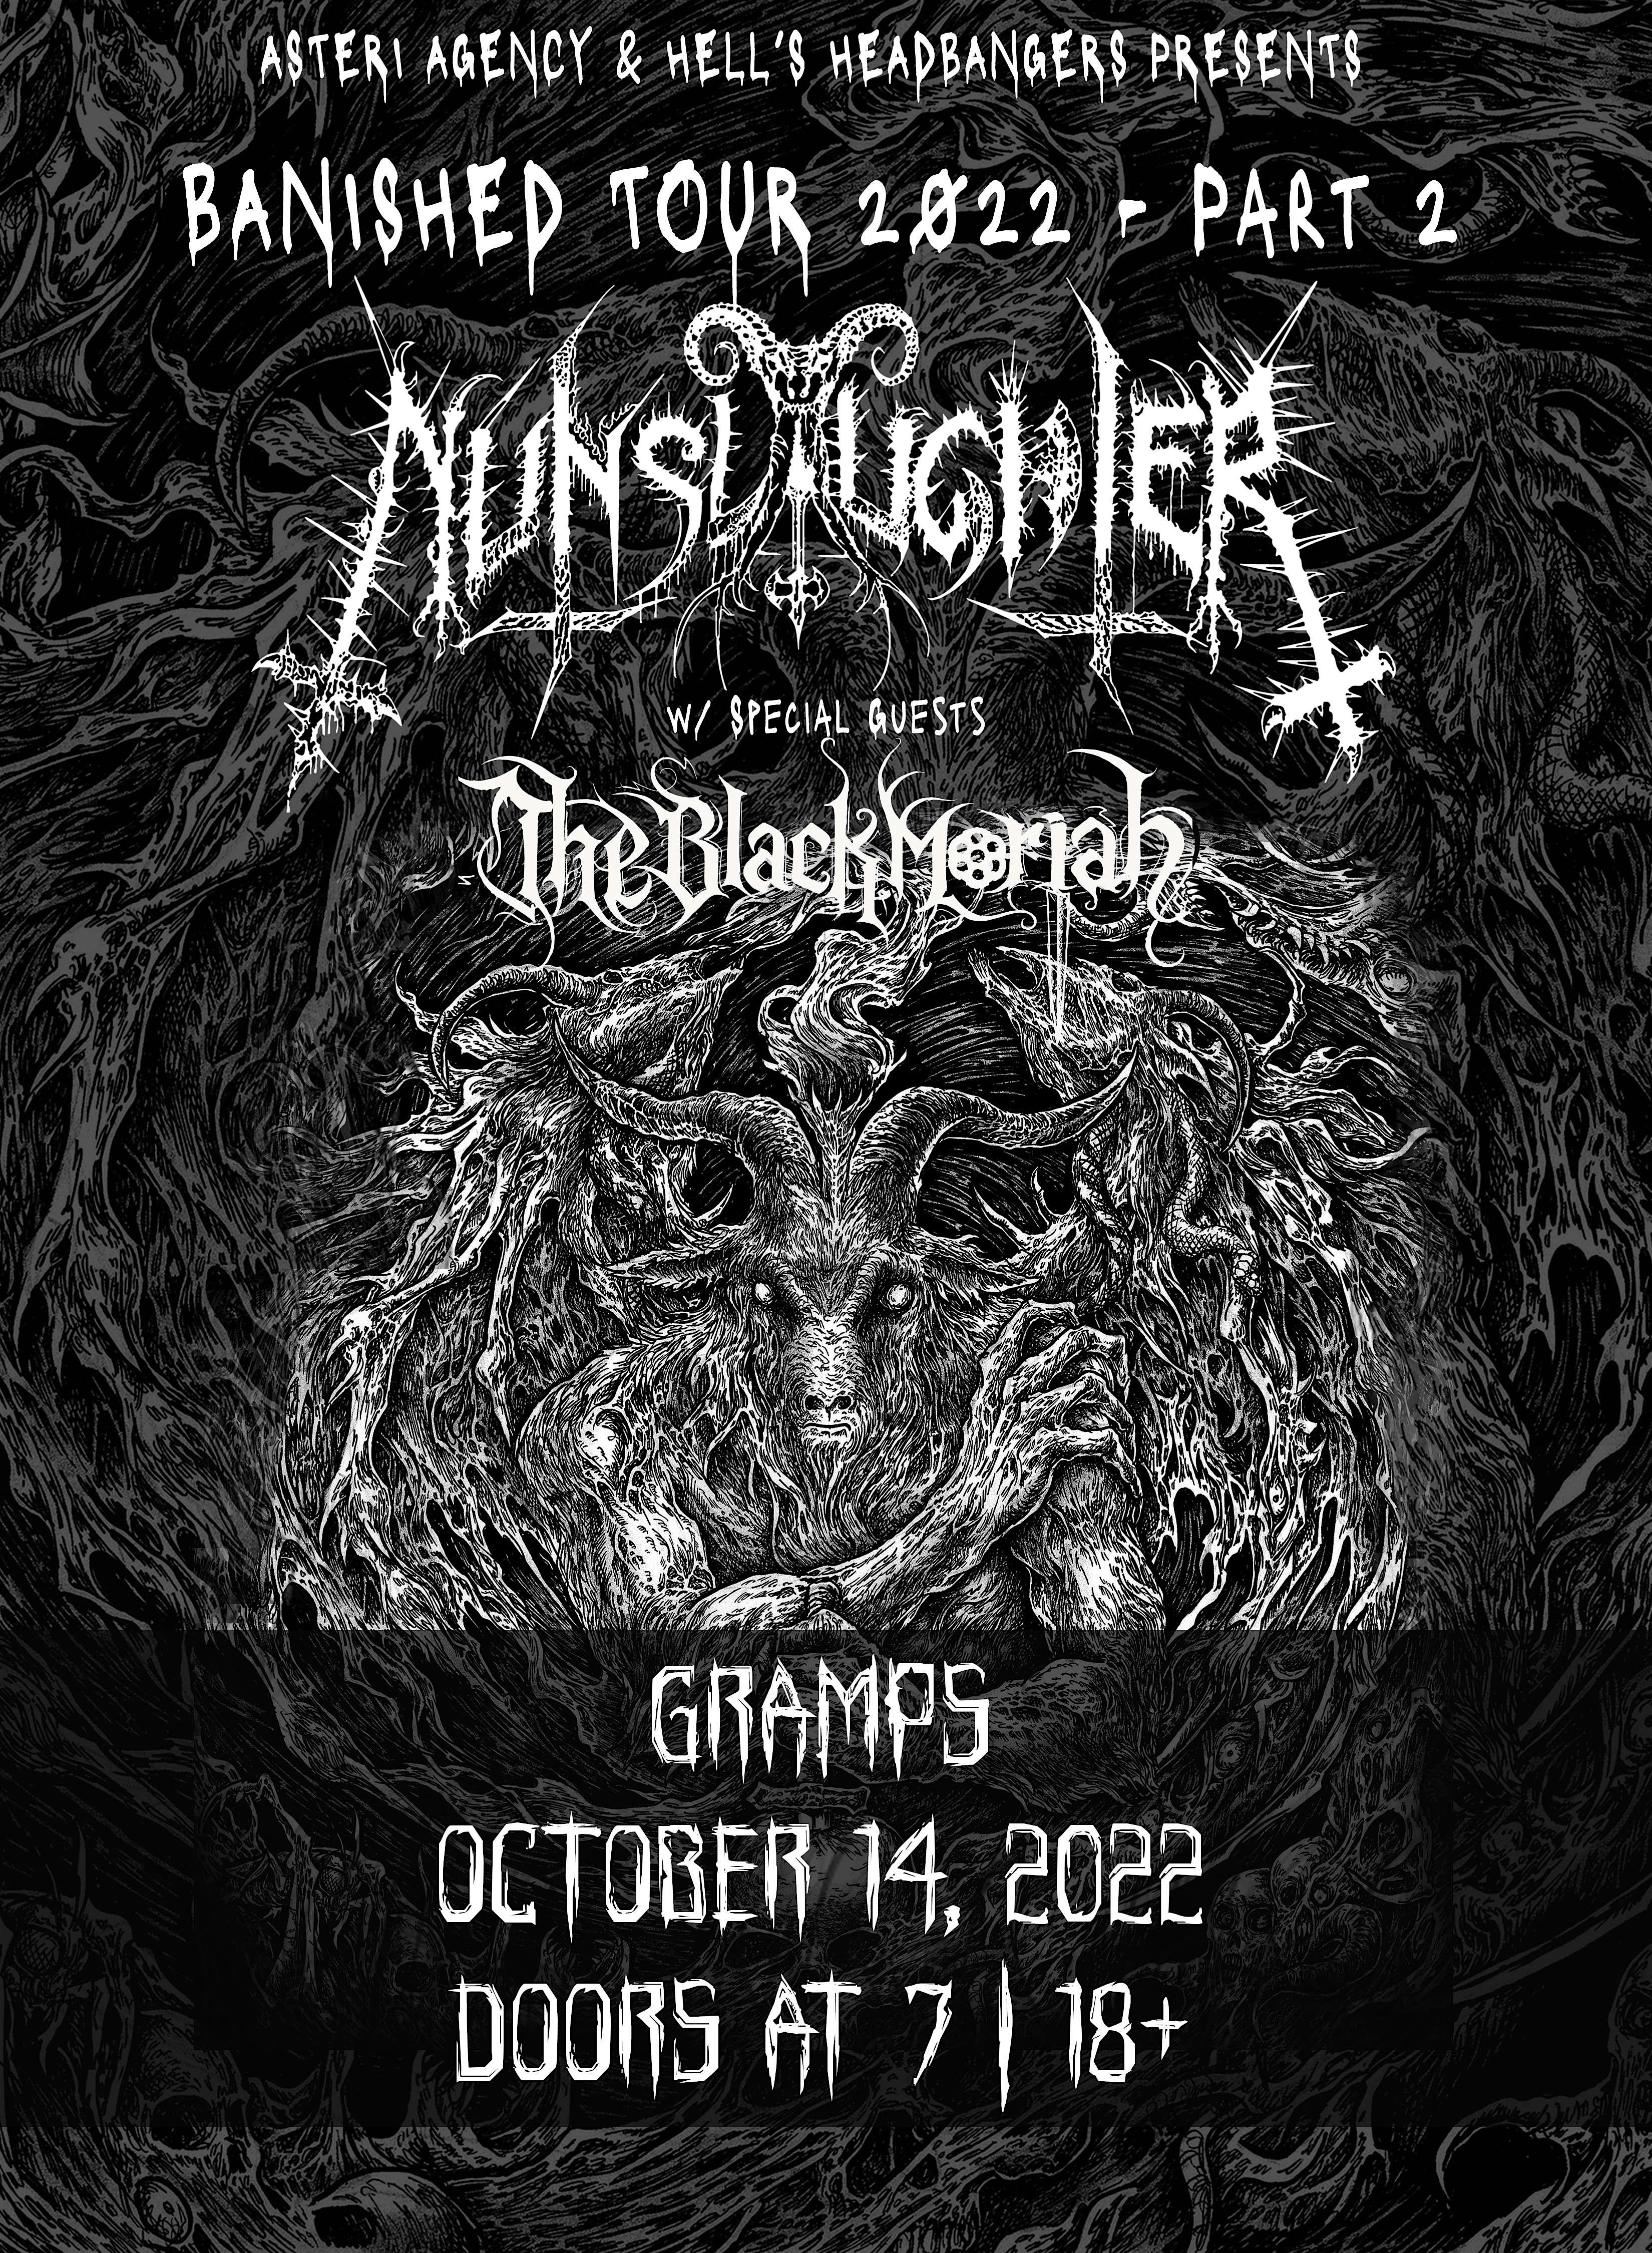 Nunslaughter, The Black Moriah, Malevich, and Beastplague in Miami at Gramps